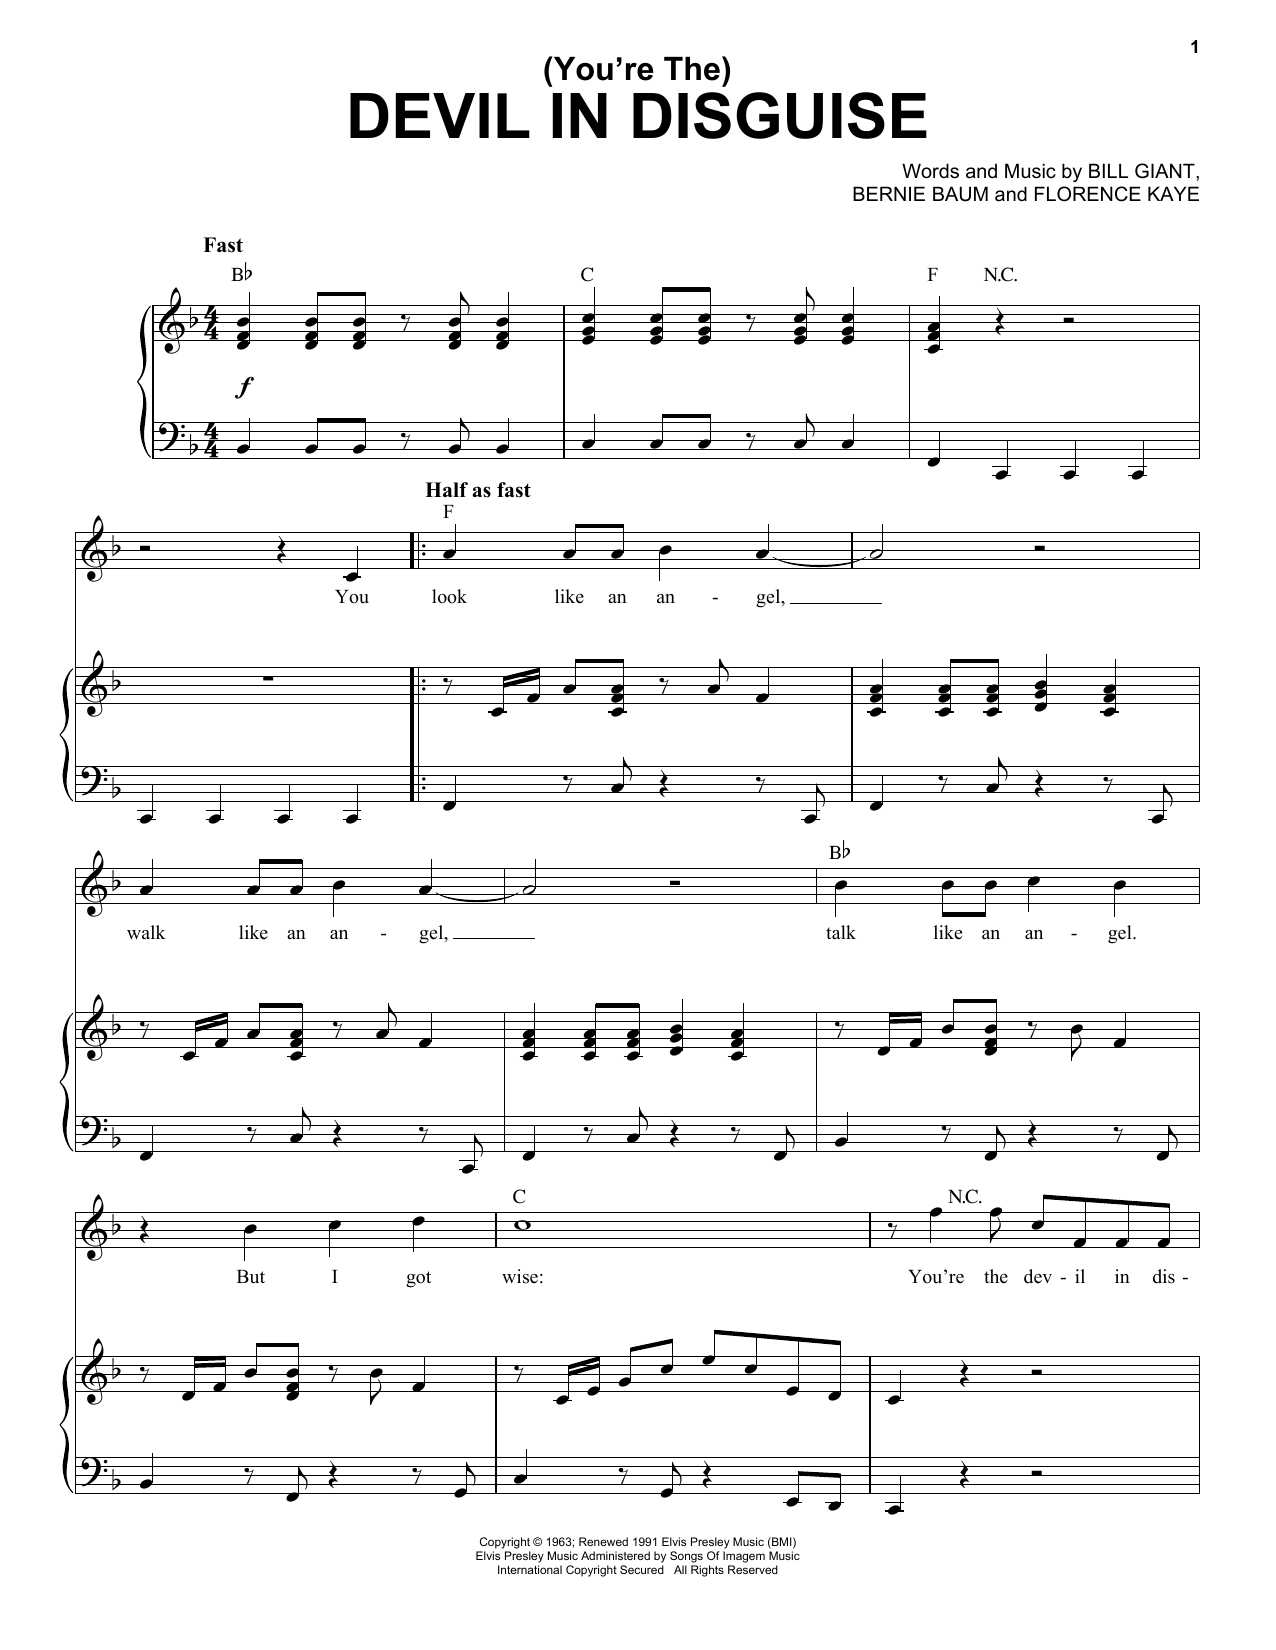 Download Elvis Presley (You're The) Devil In Disguise Sheet Music